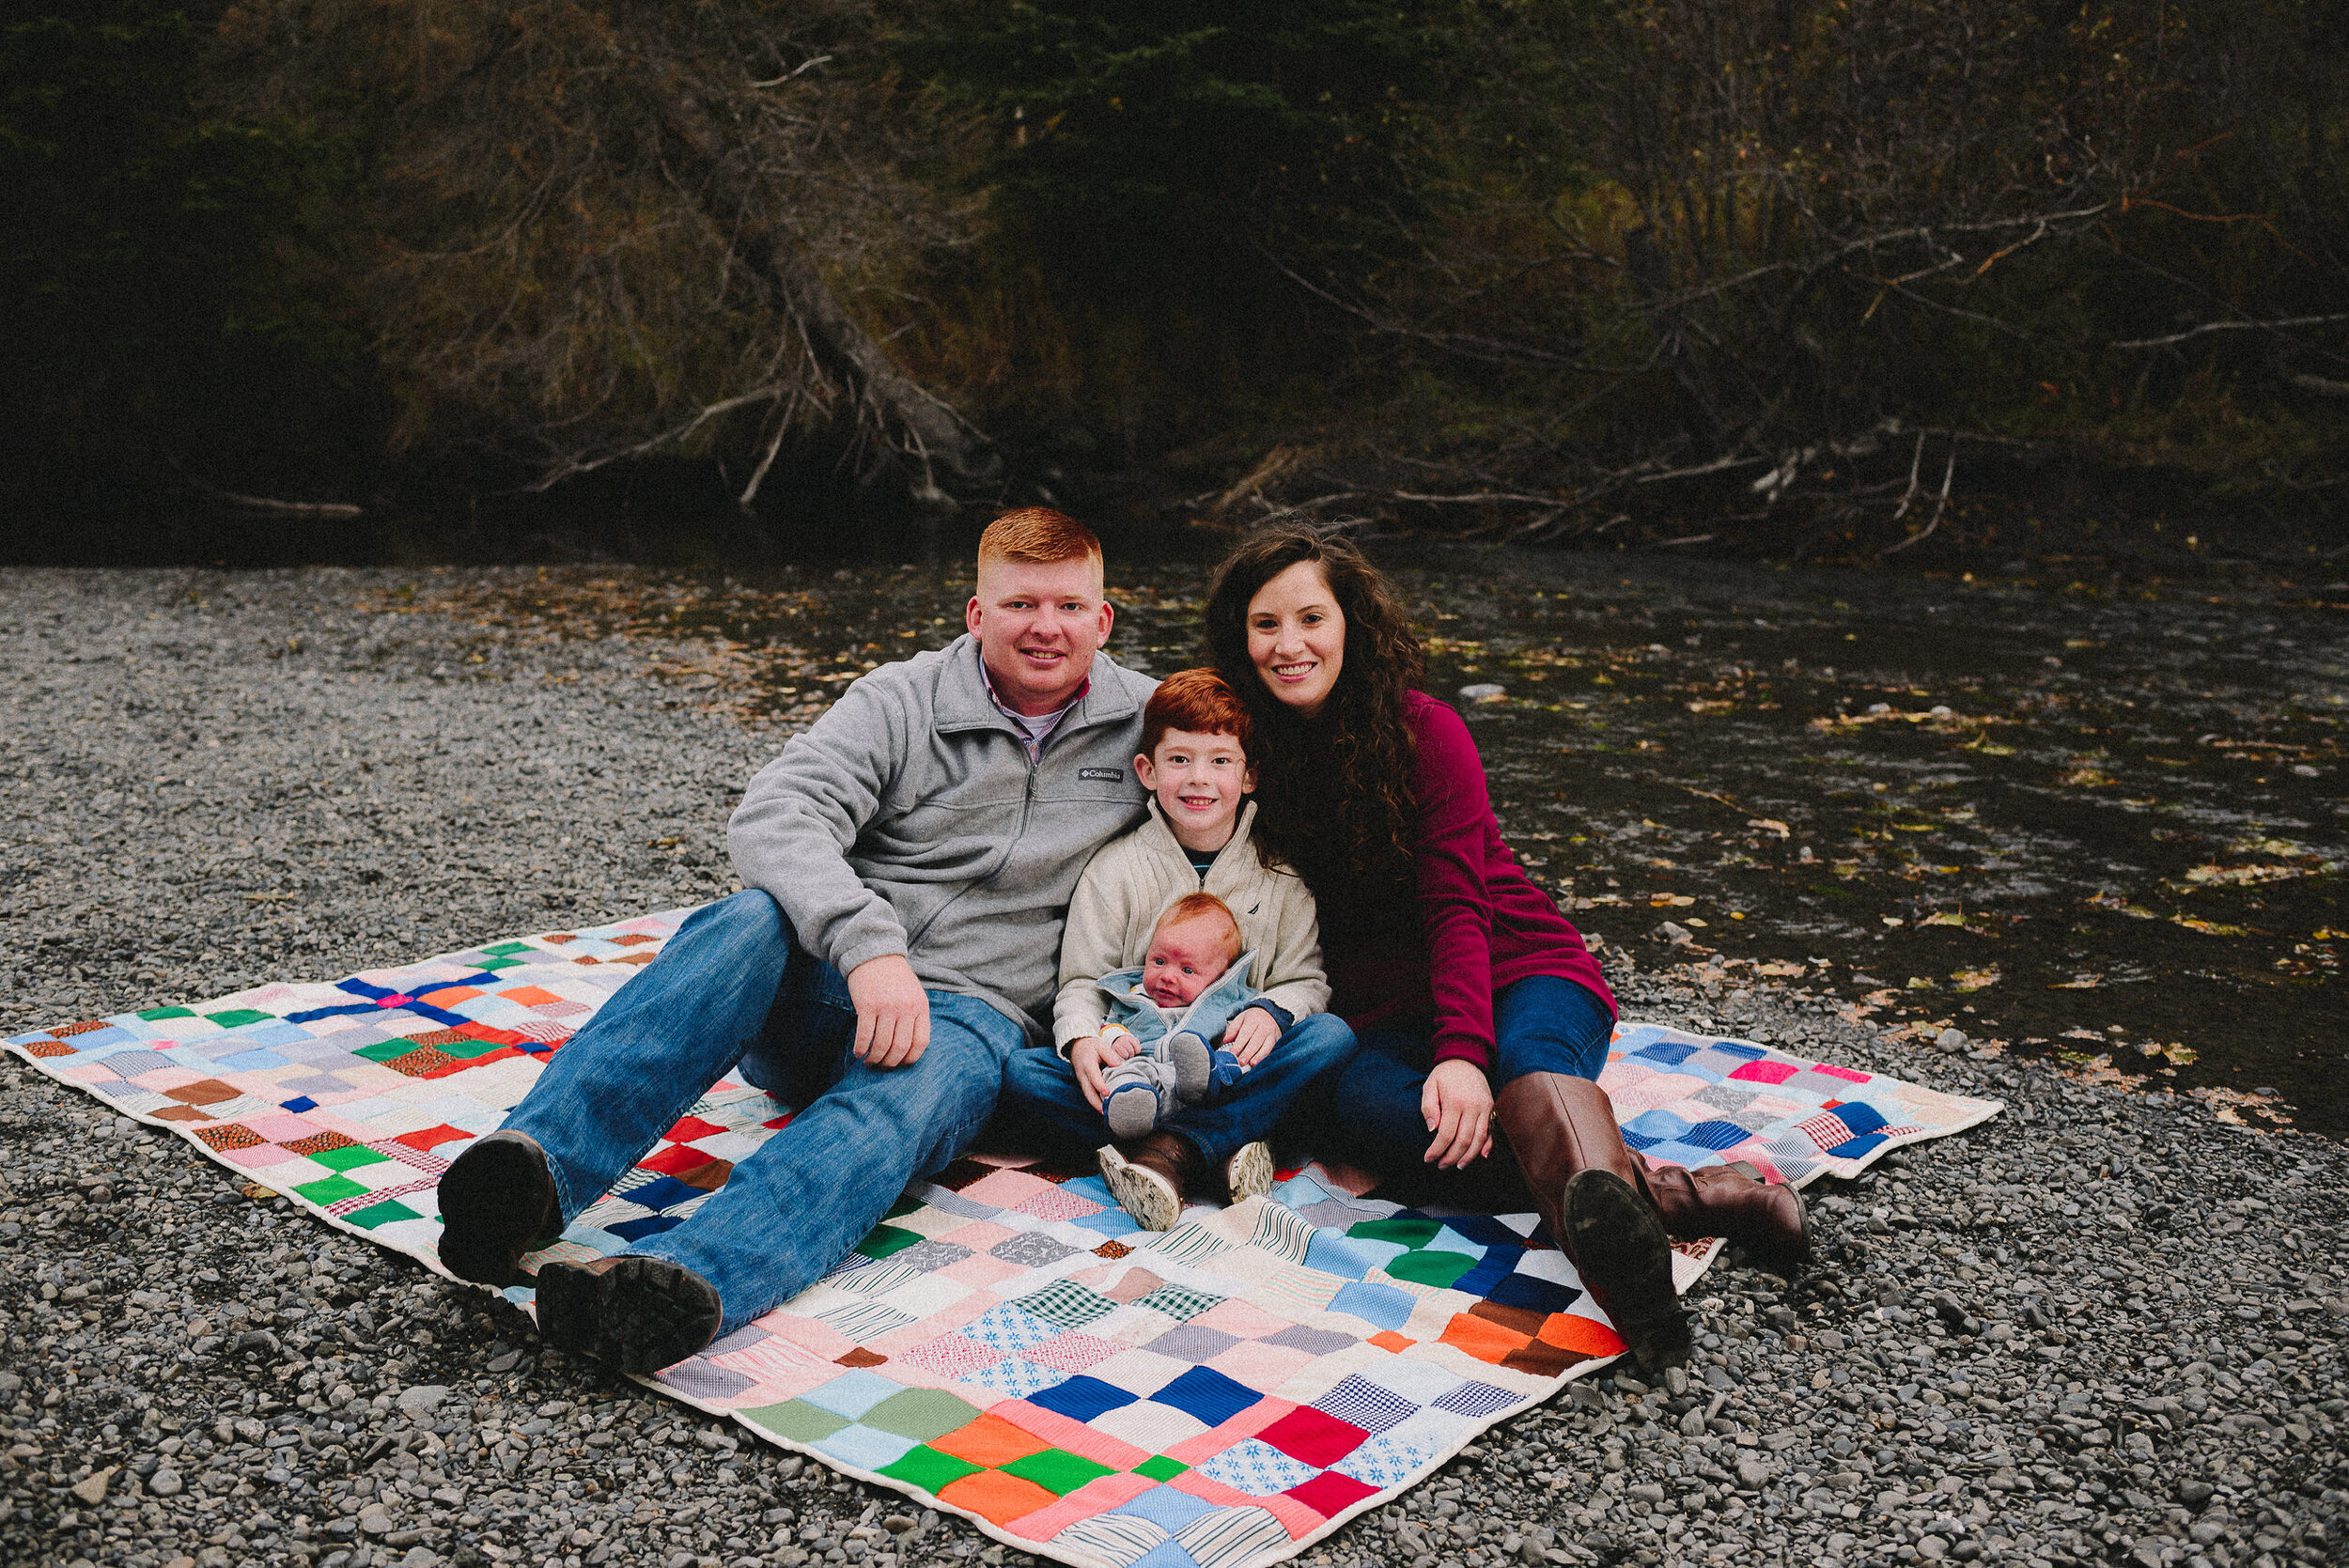 north-fork-eagle-river-fall-family-session-alaska-photographer-way-up-north-photography (101).jpg